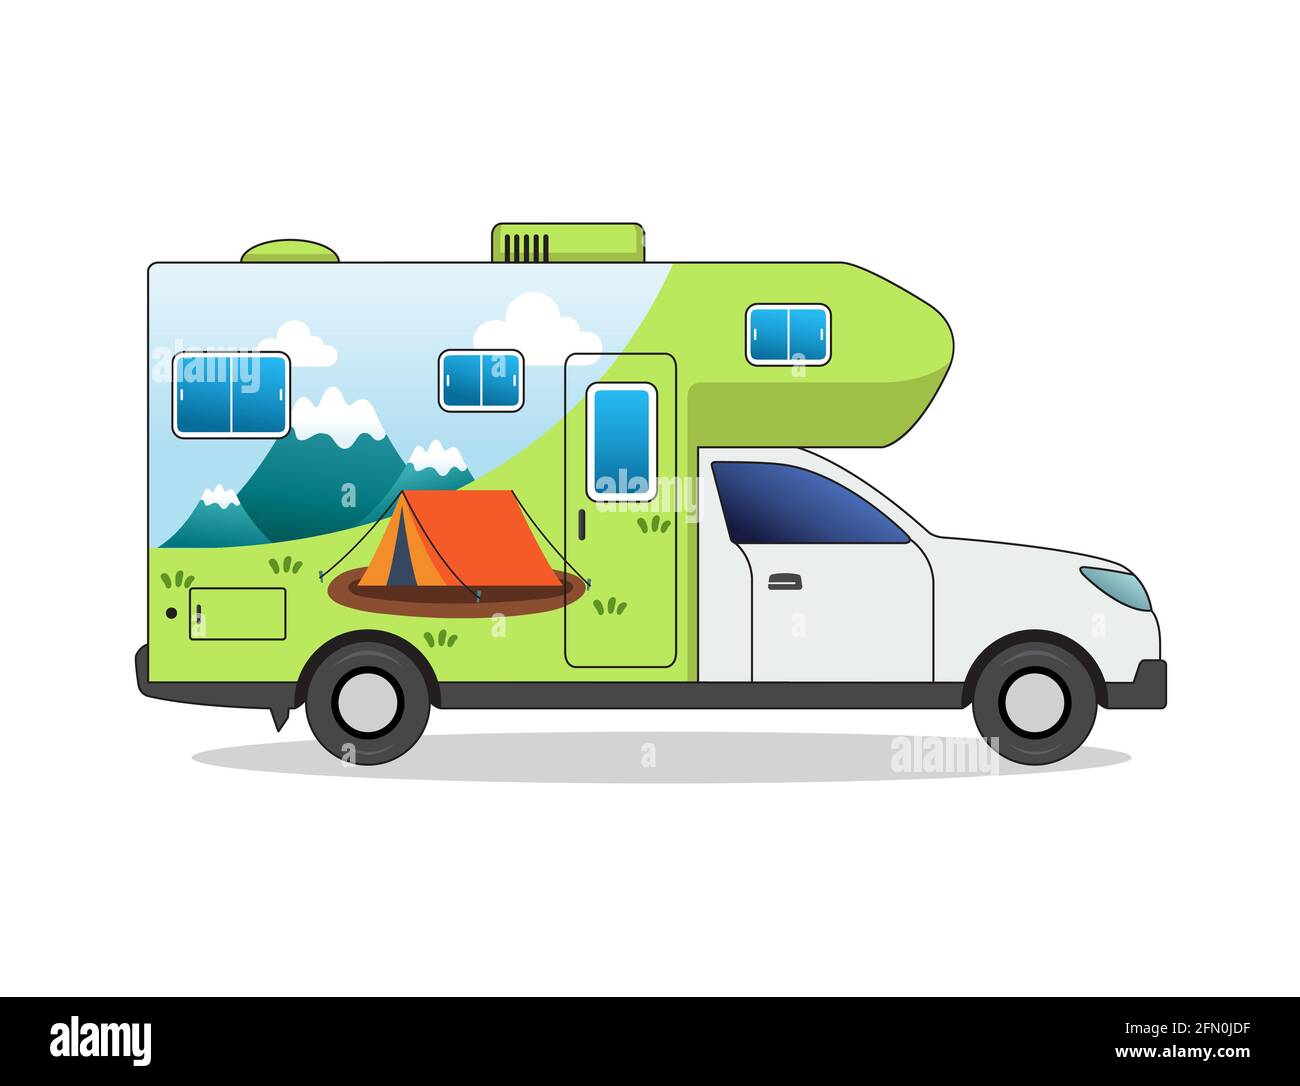 Camping car vector illustration of tent, landscape image. Stock Vector